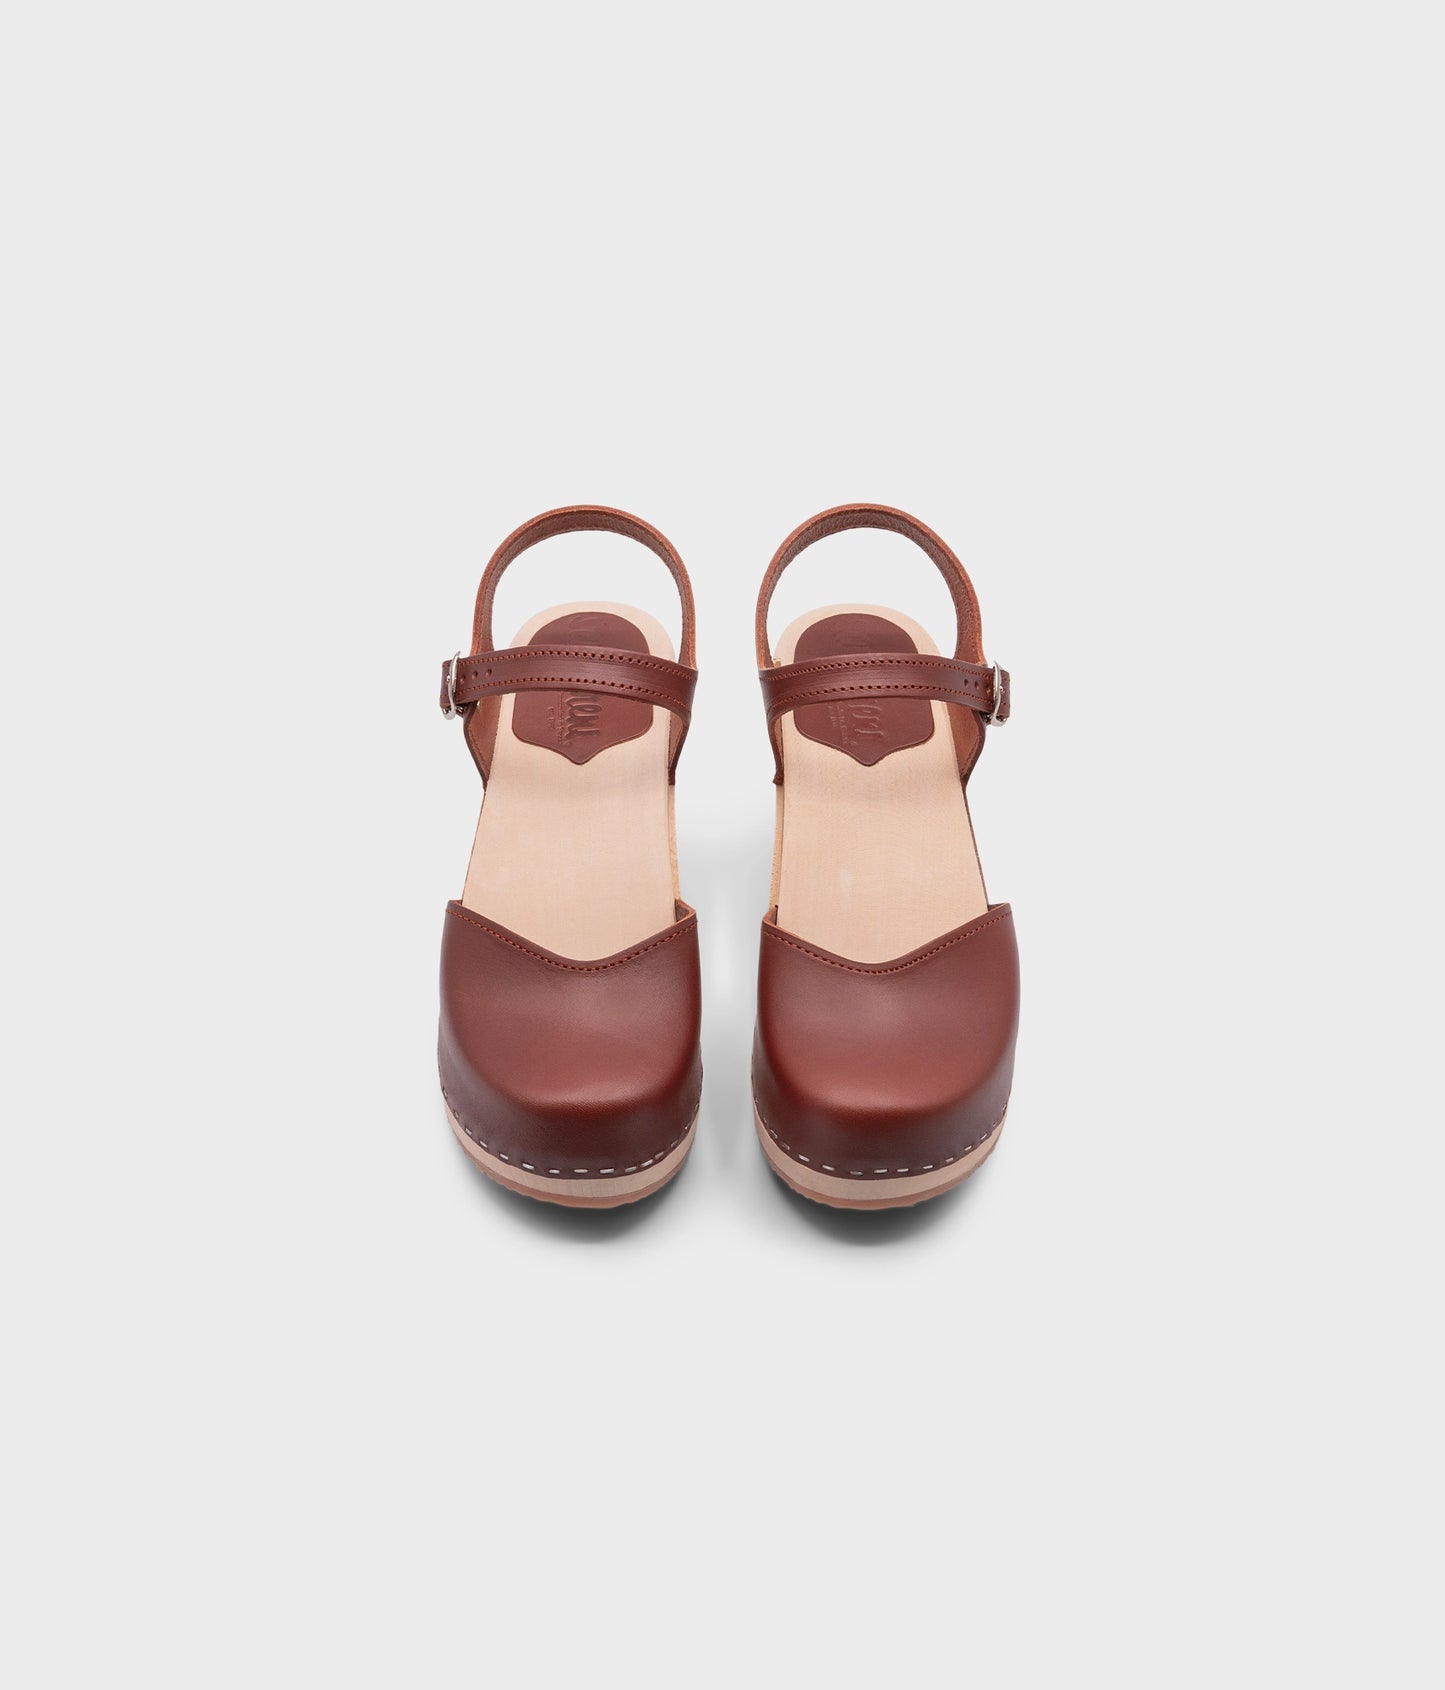 high heeled closed-toe clog sandal in cognac red vegetable tanned leather stapled on a light wooden base